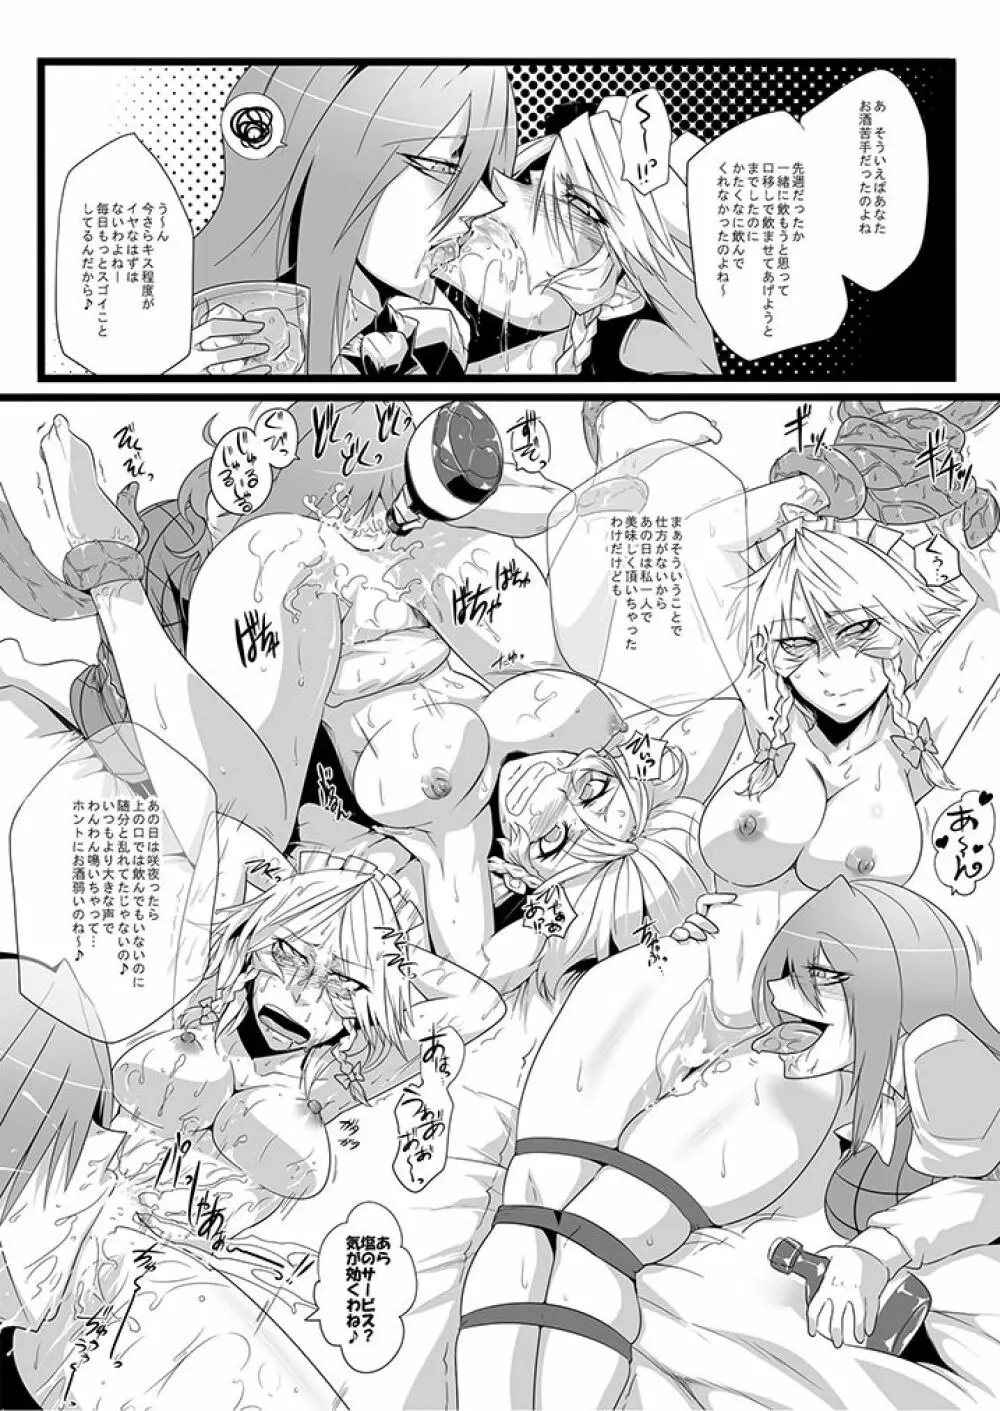 SAKUYA MAID in HEAVEN/ALL IN 1 - page205